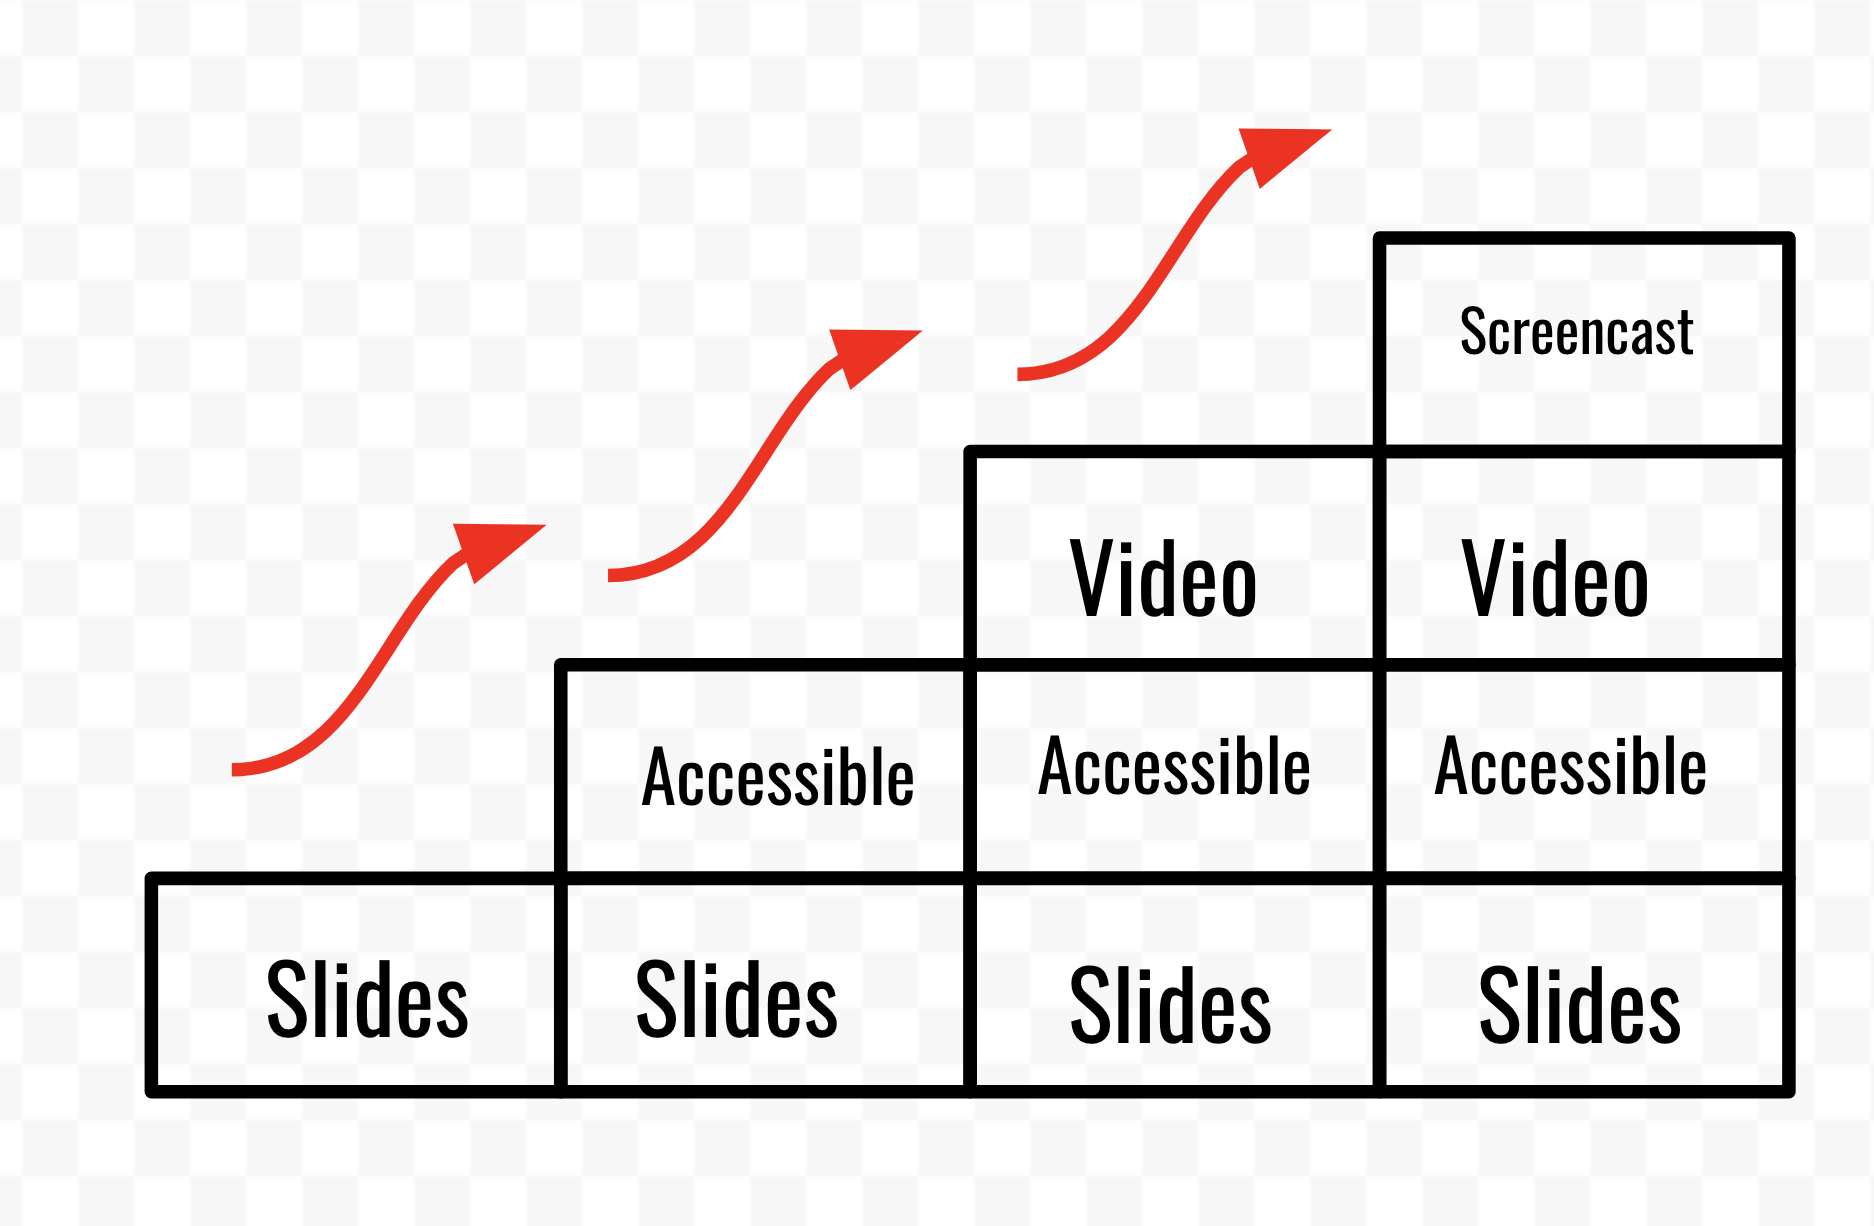 Steps to enhance a slide presentation: accessible, add audio and video, make it a screencast, go interactive.